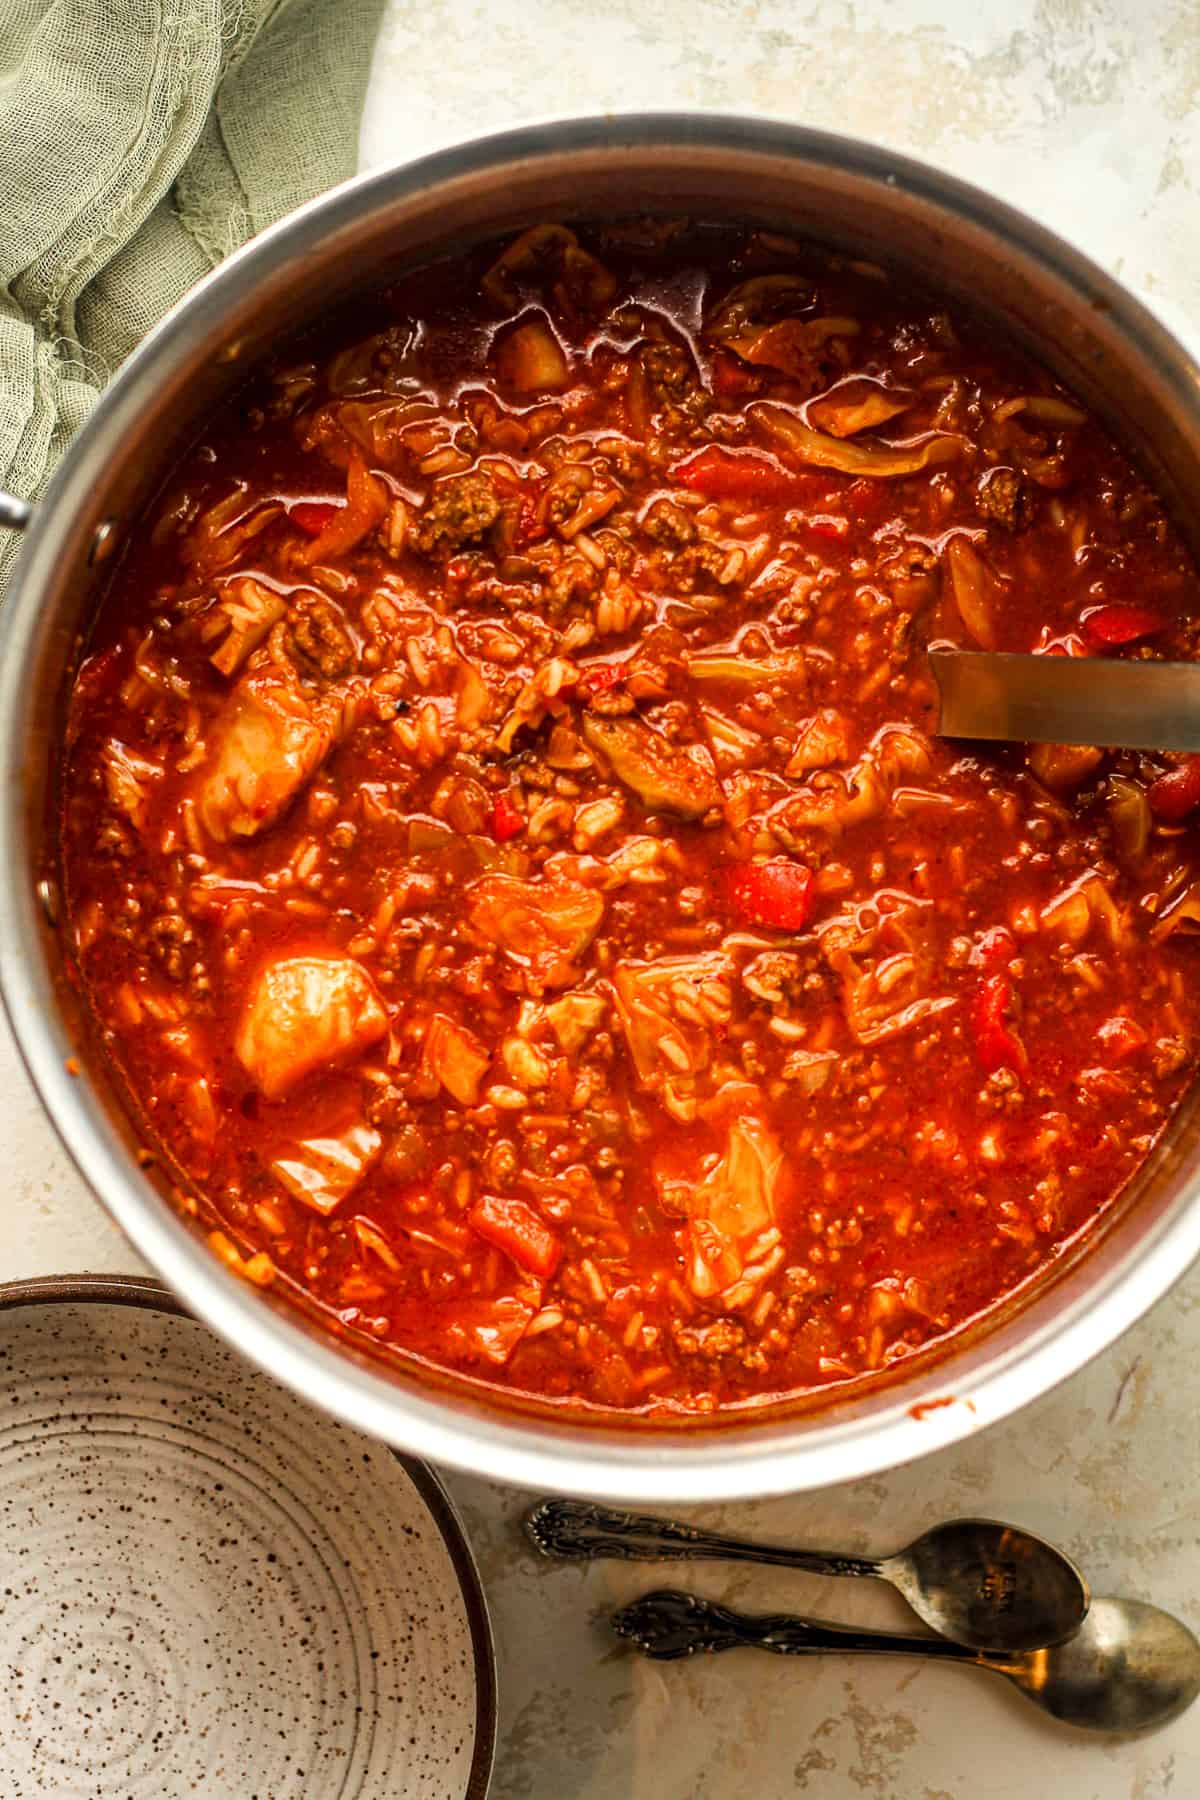 Overhead view of a large pot of stuffed cabbage soup.